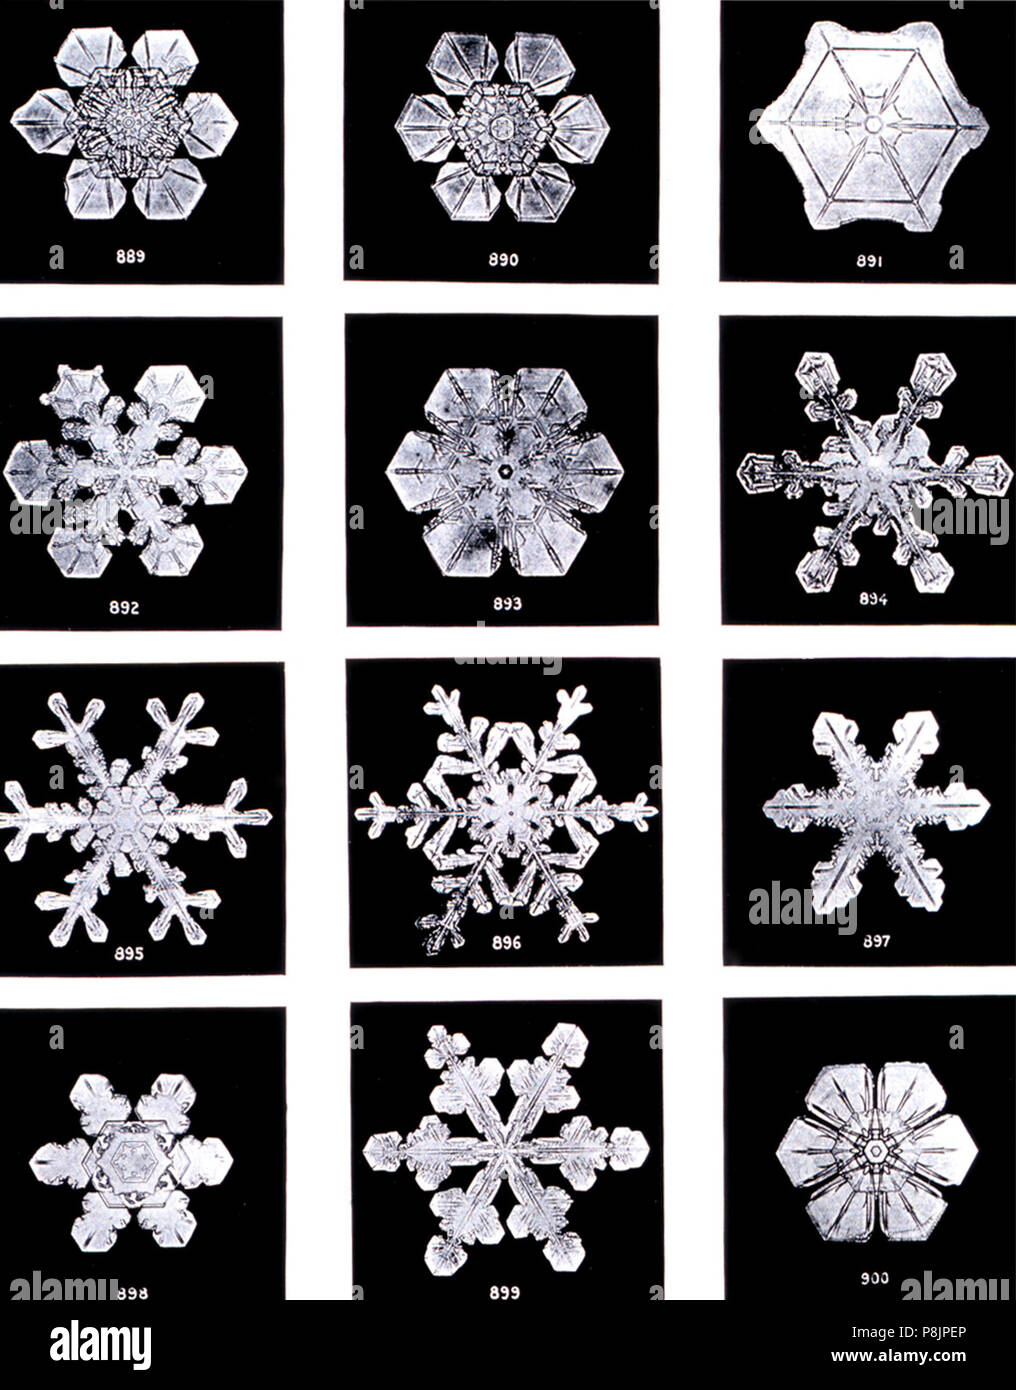 English: Snow flakes by Wilson Bentley. Bentley was a bachelor farmer whose hobby was photographing snow flakes. ; Image ID: wea02087, Historic NWS Collection ; Location: Jericho, Vermont ; Photo Date: 1902 Winter . 1902 523 SnowflakesWilsonBentley Stock Photo